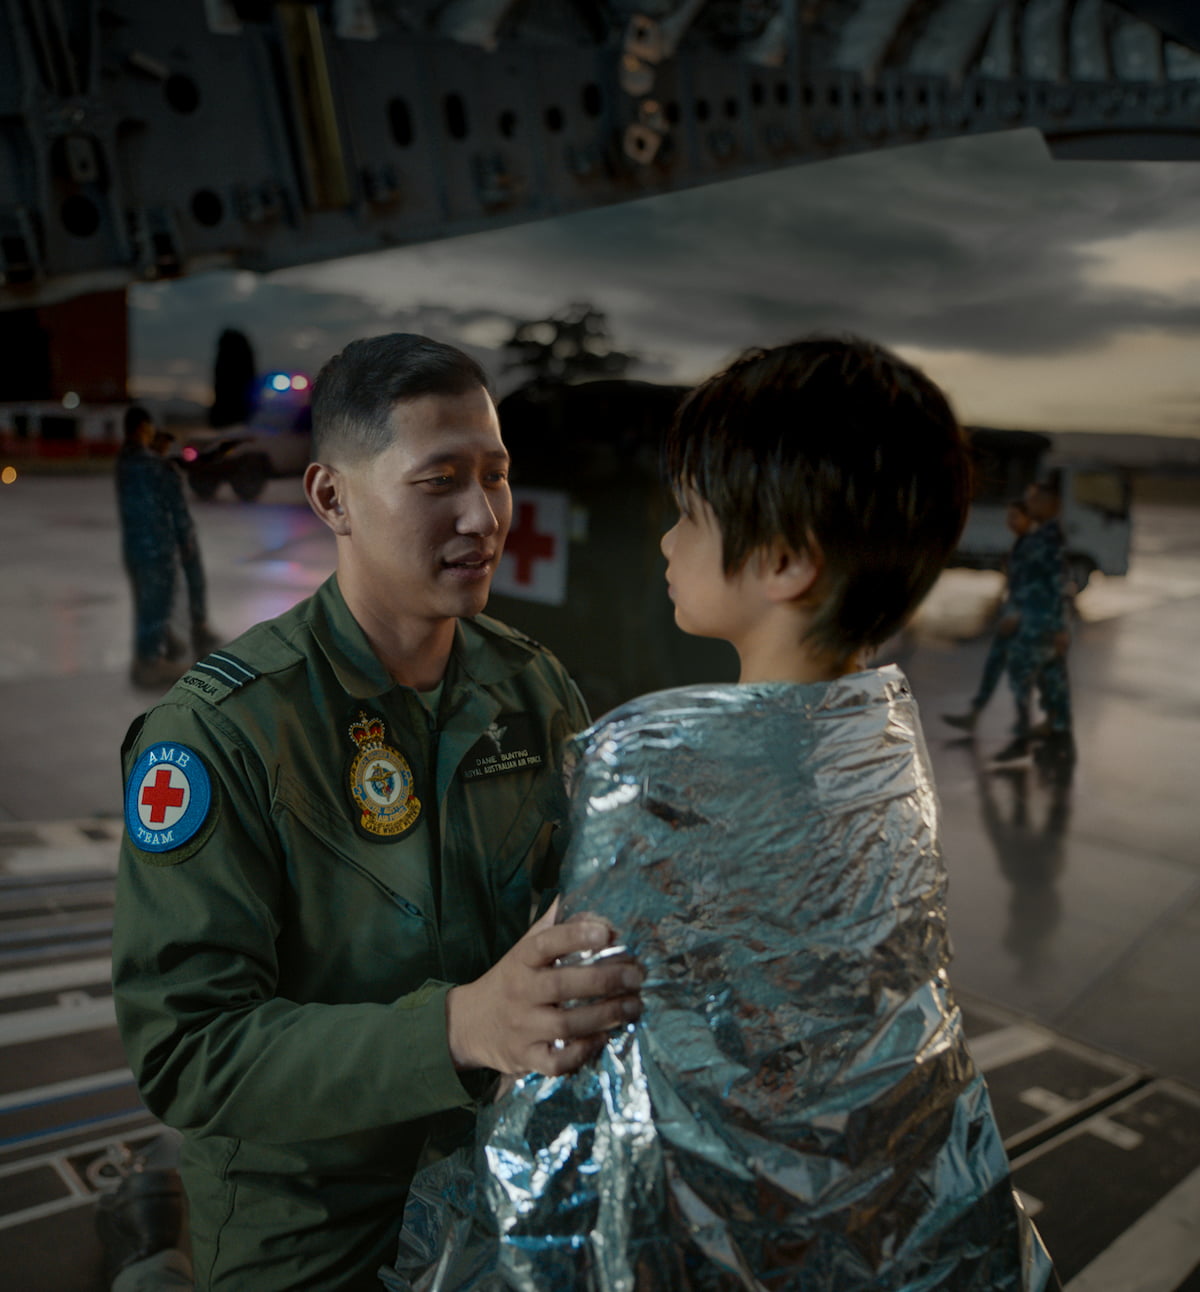 A member of the Air Force wrapping a blanket around a child.